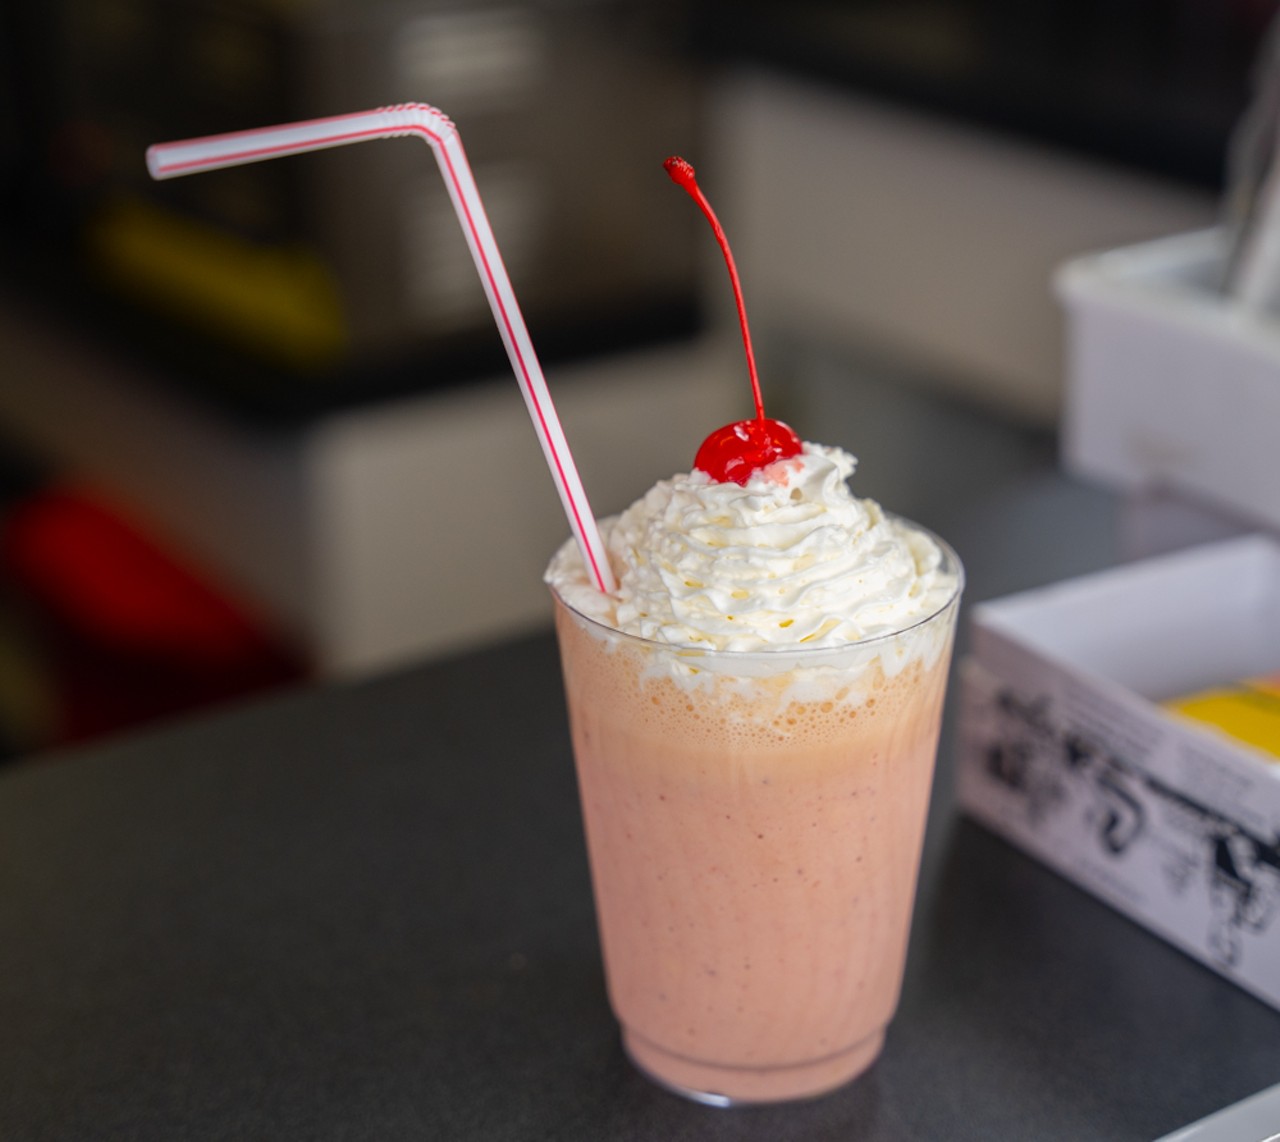 Smokin' Dews' Strawberry Dew Whip: Vanilla ice cream blended with frozen strawberries, topped with strawberry juice and whipped cream.